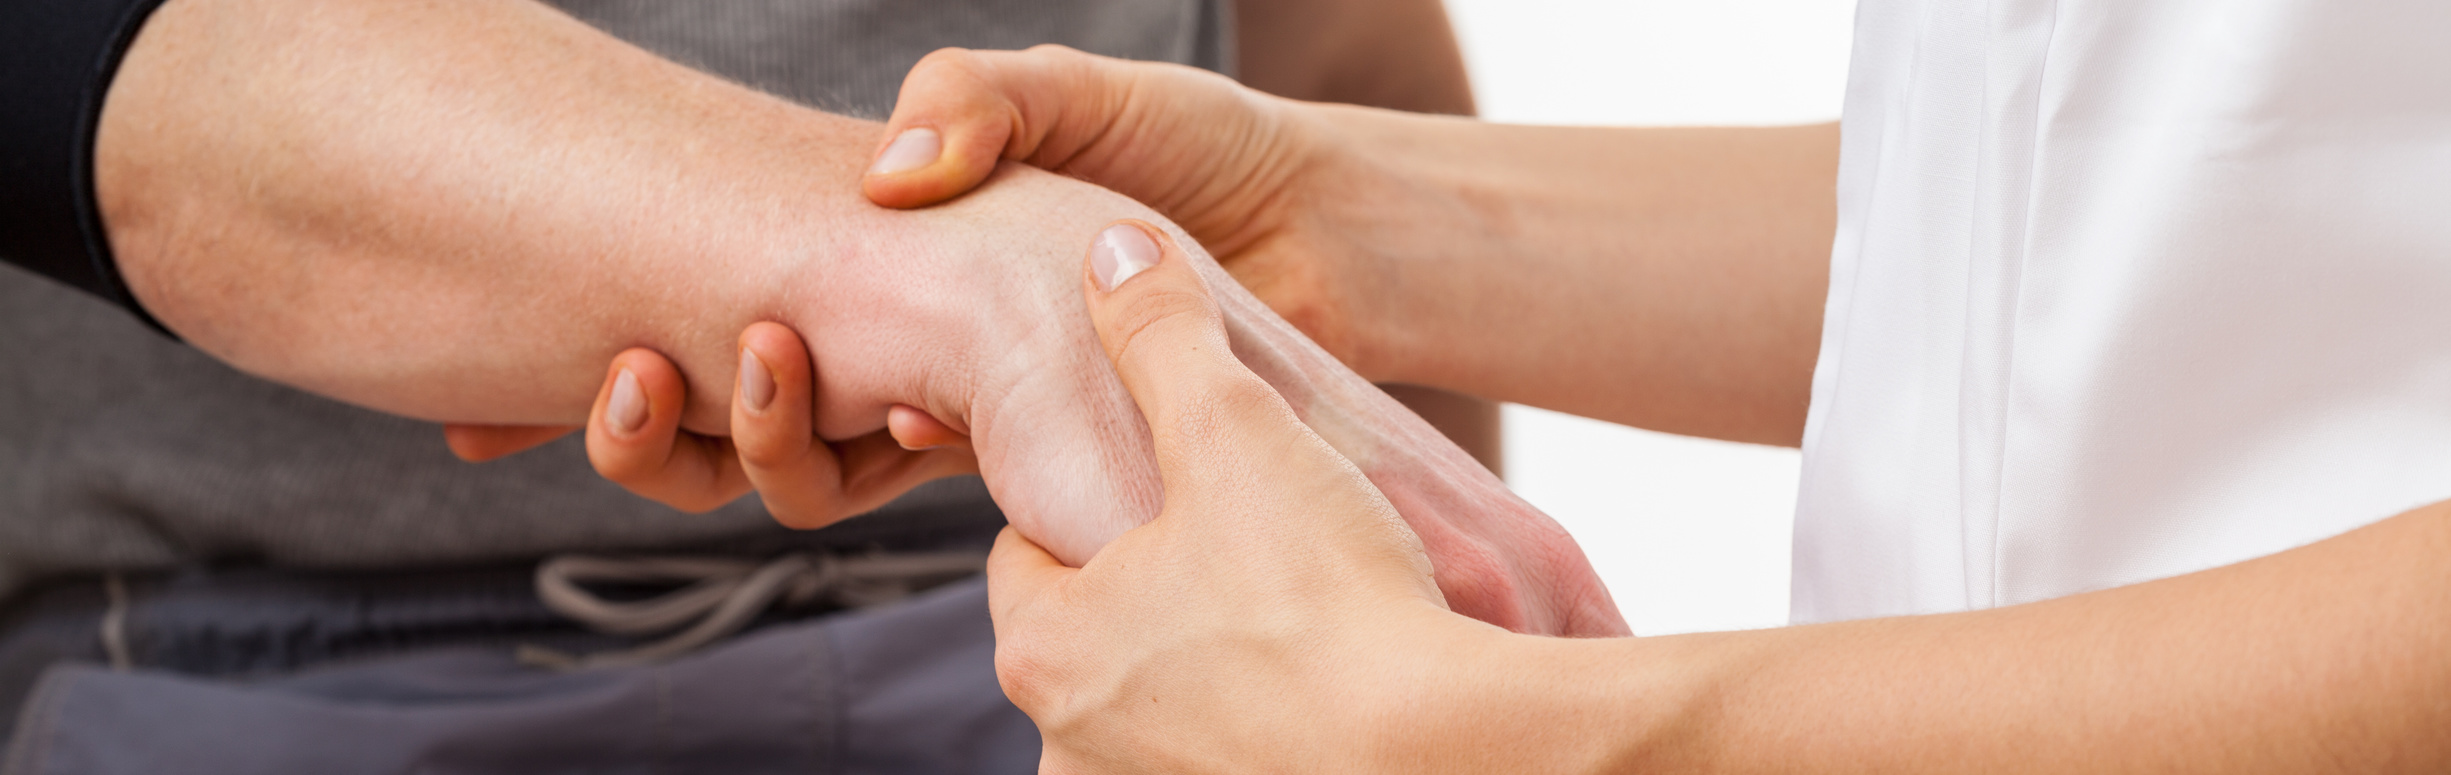 Keys to take advantage of your visit to the physiotherapist newcastle